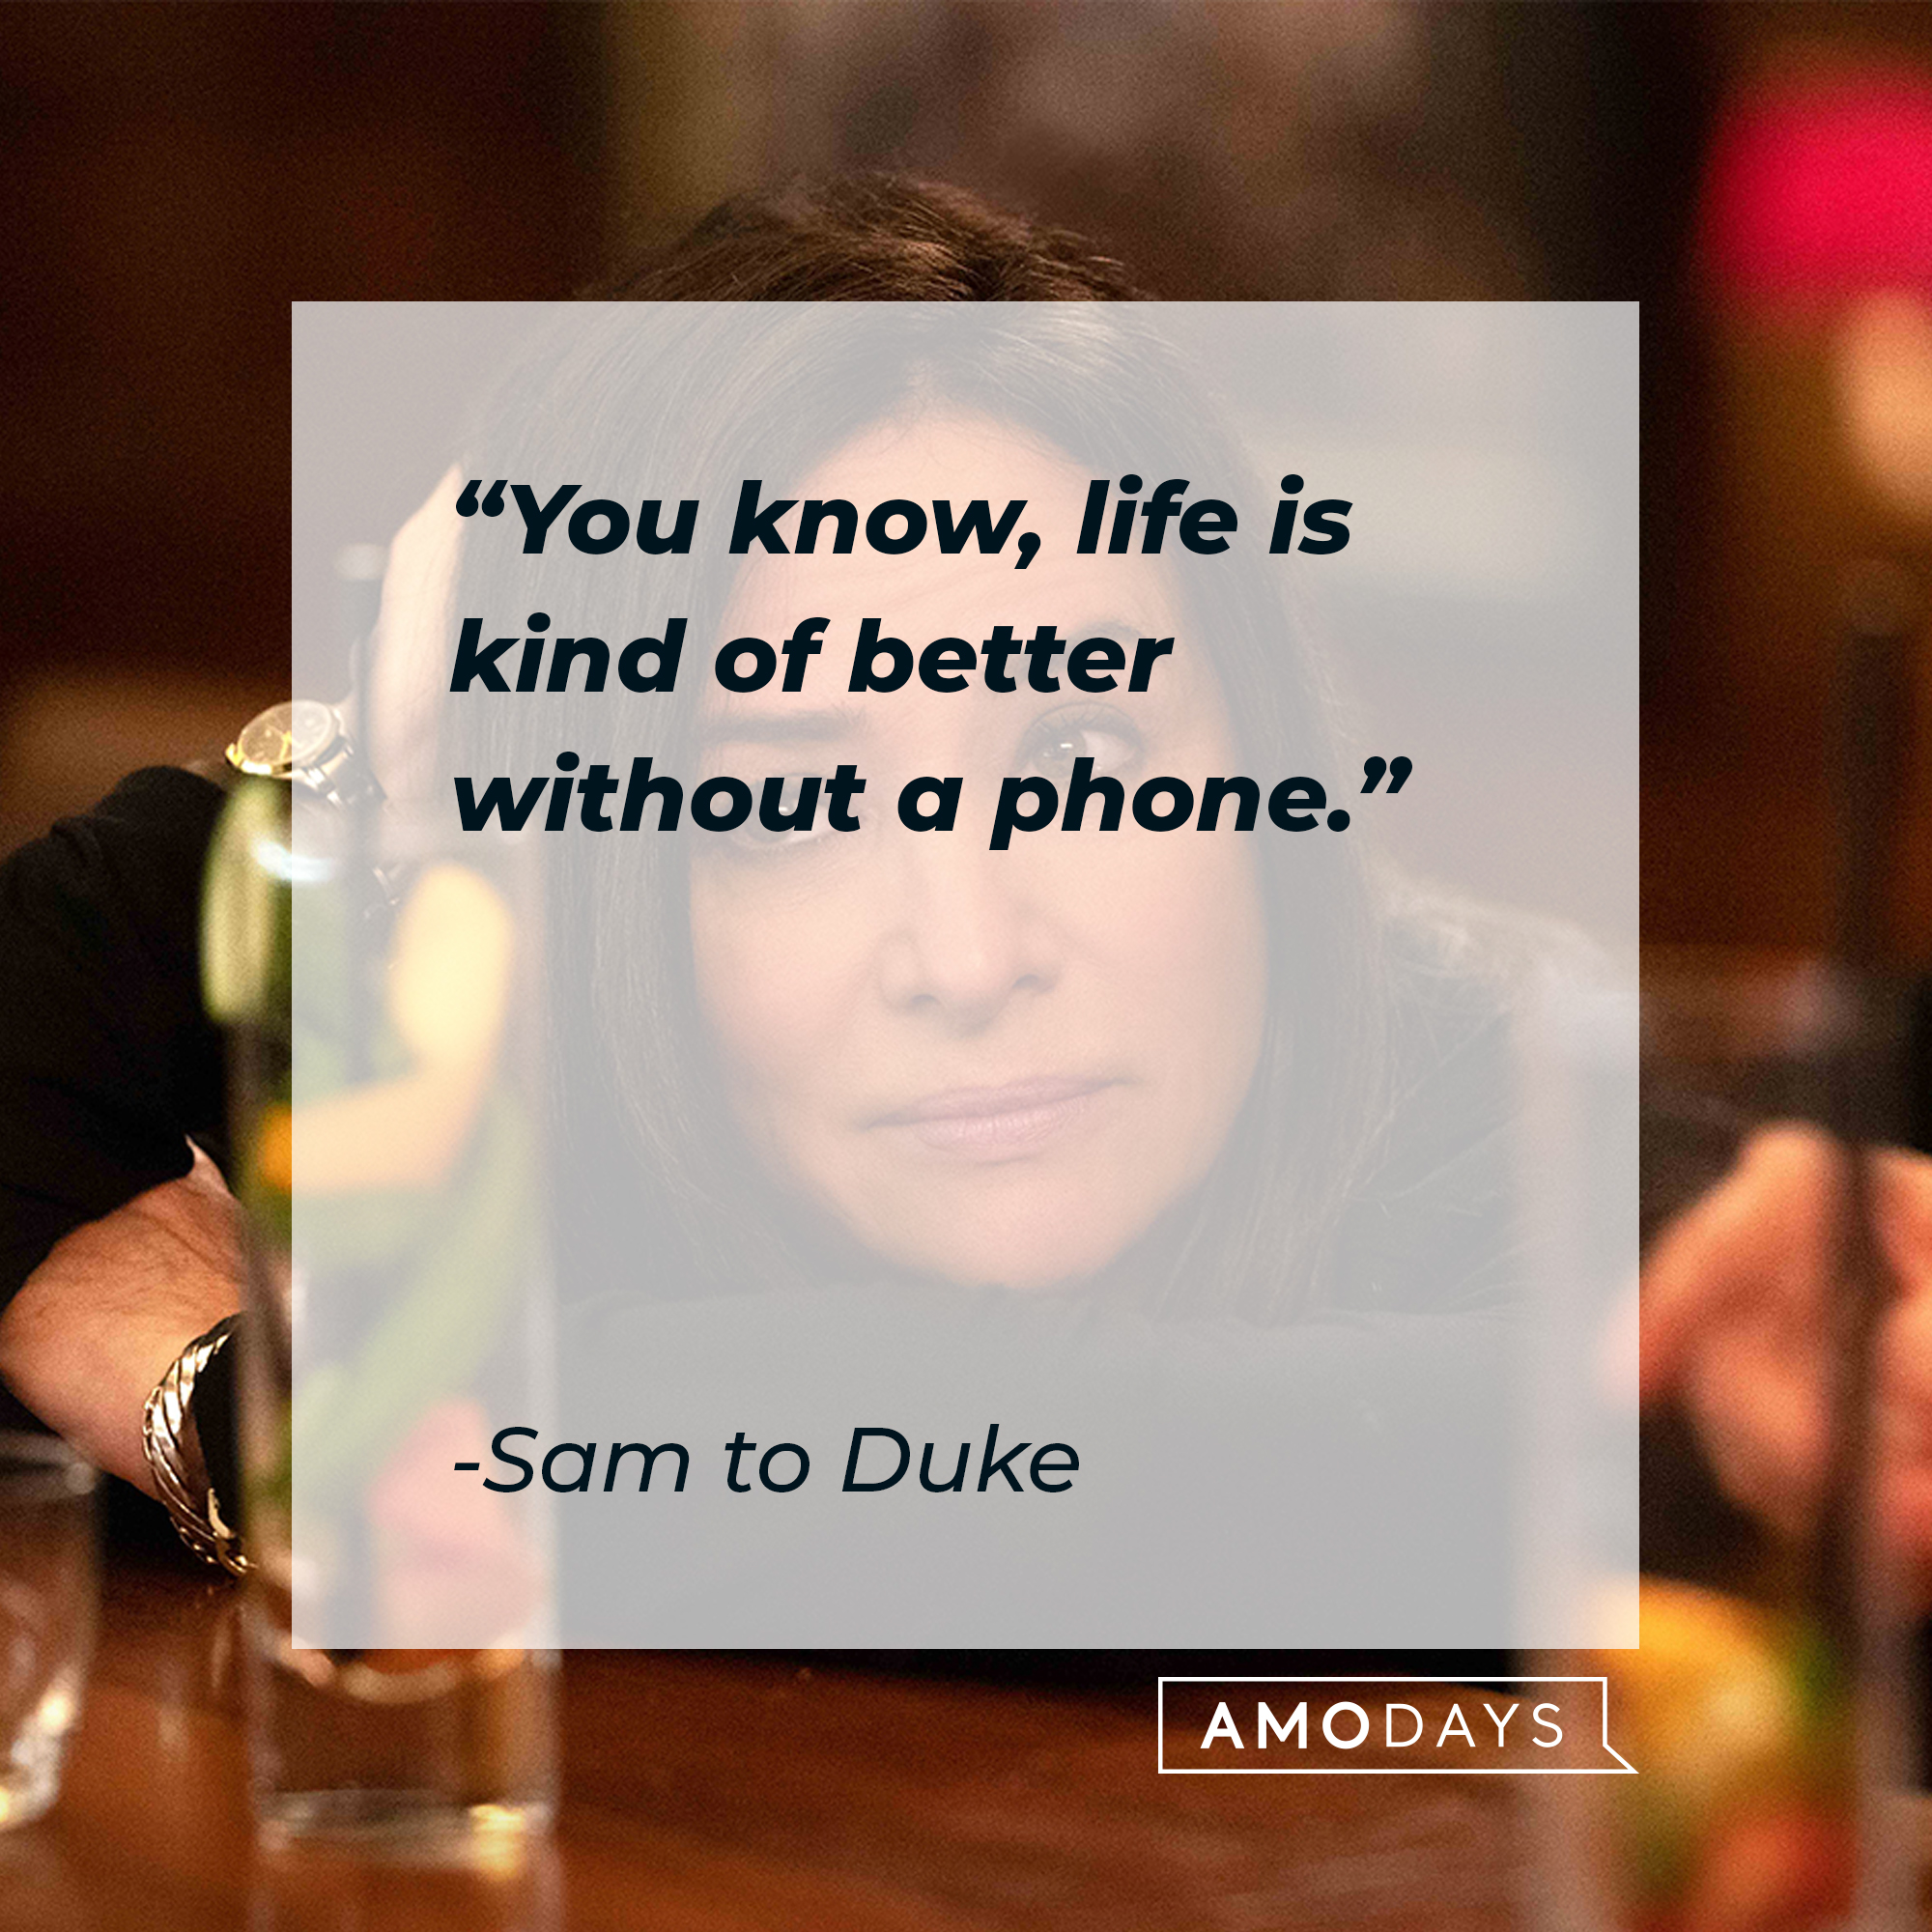 Sam's quote to Duke: "You know, life is kind of better without a phone." | Source: facebook.com/BetterThingsFX